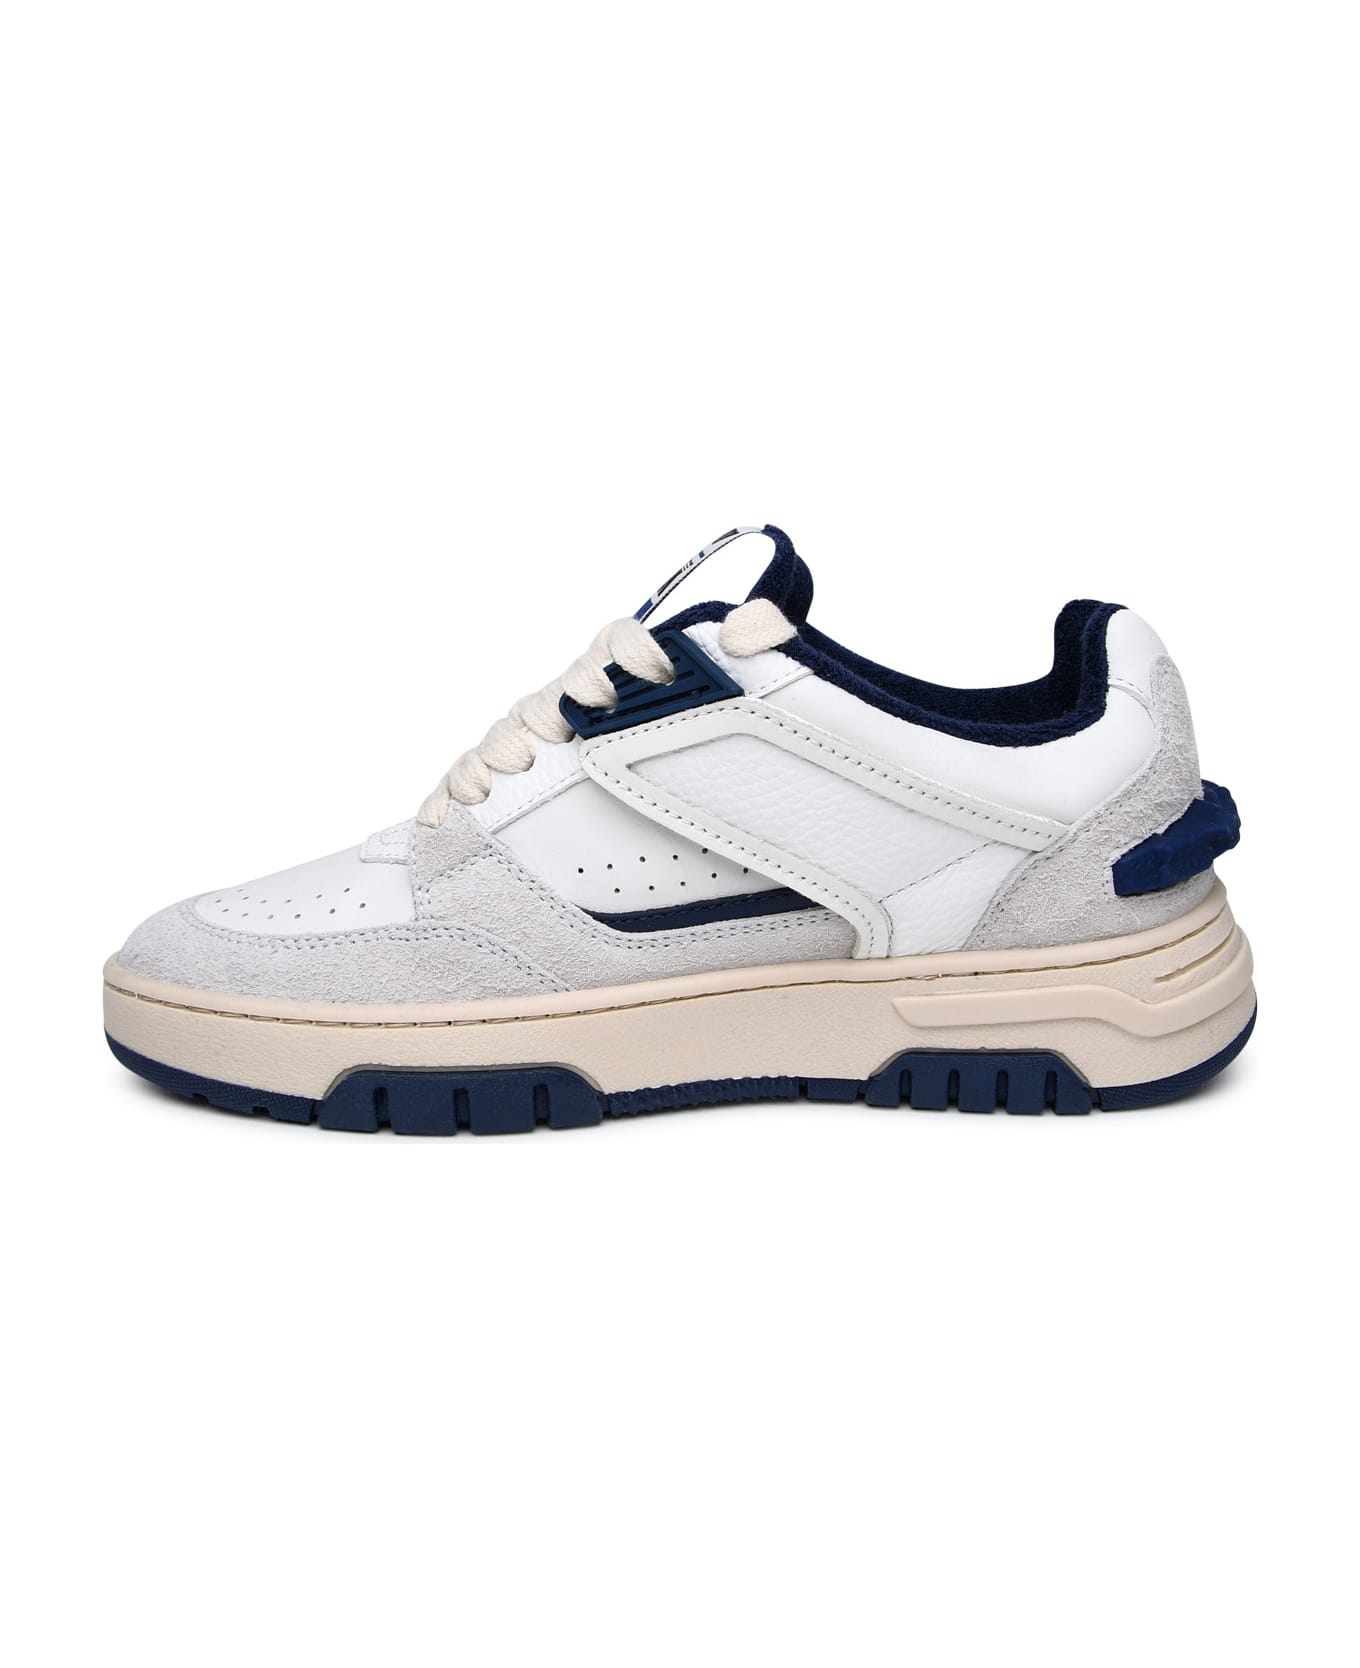 MSGM New Rck White Leather Sneakers - White